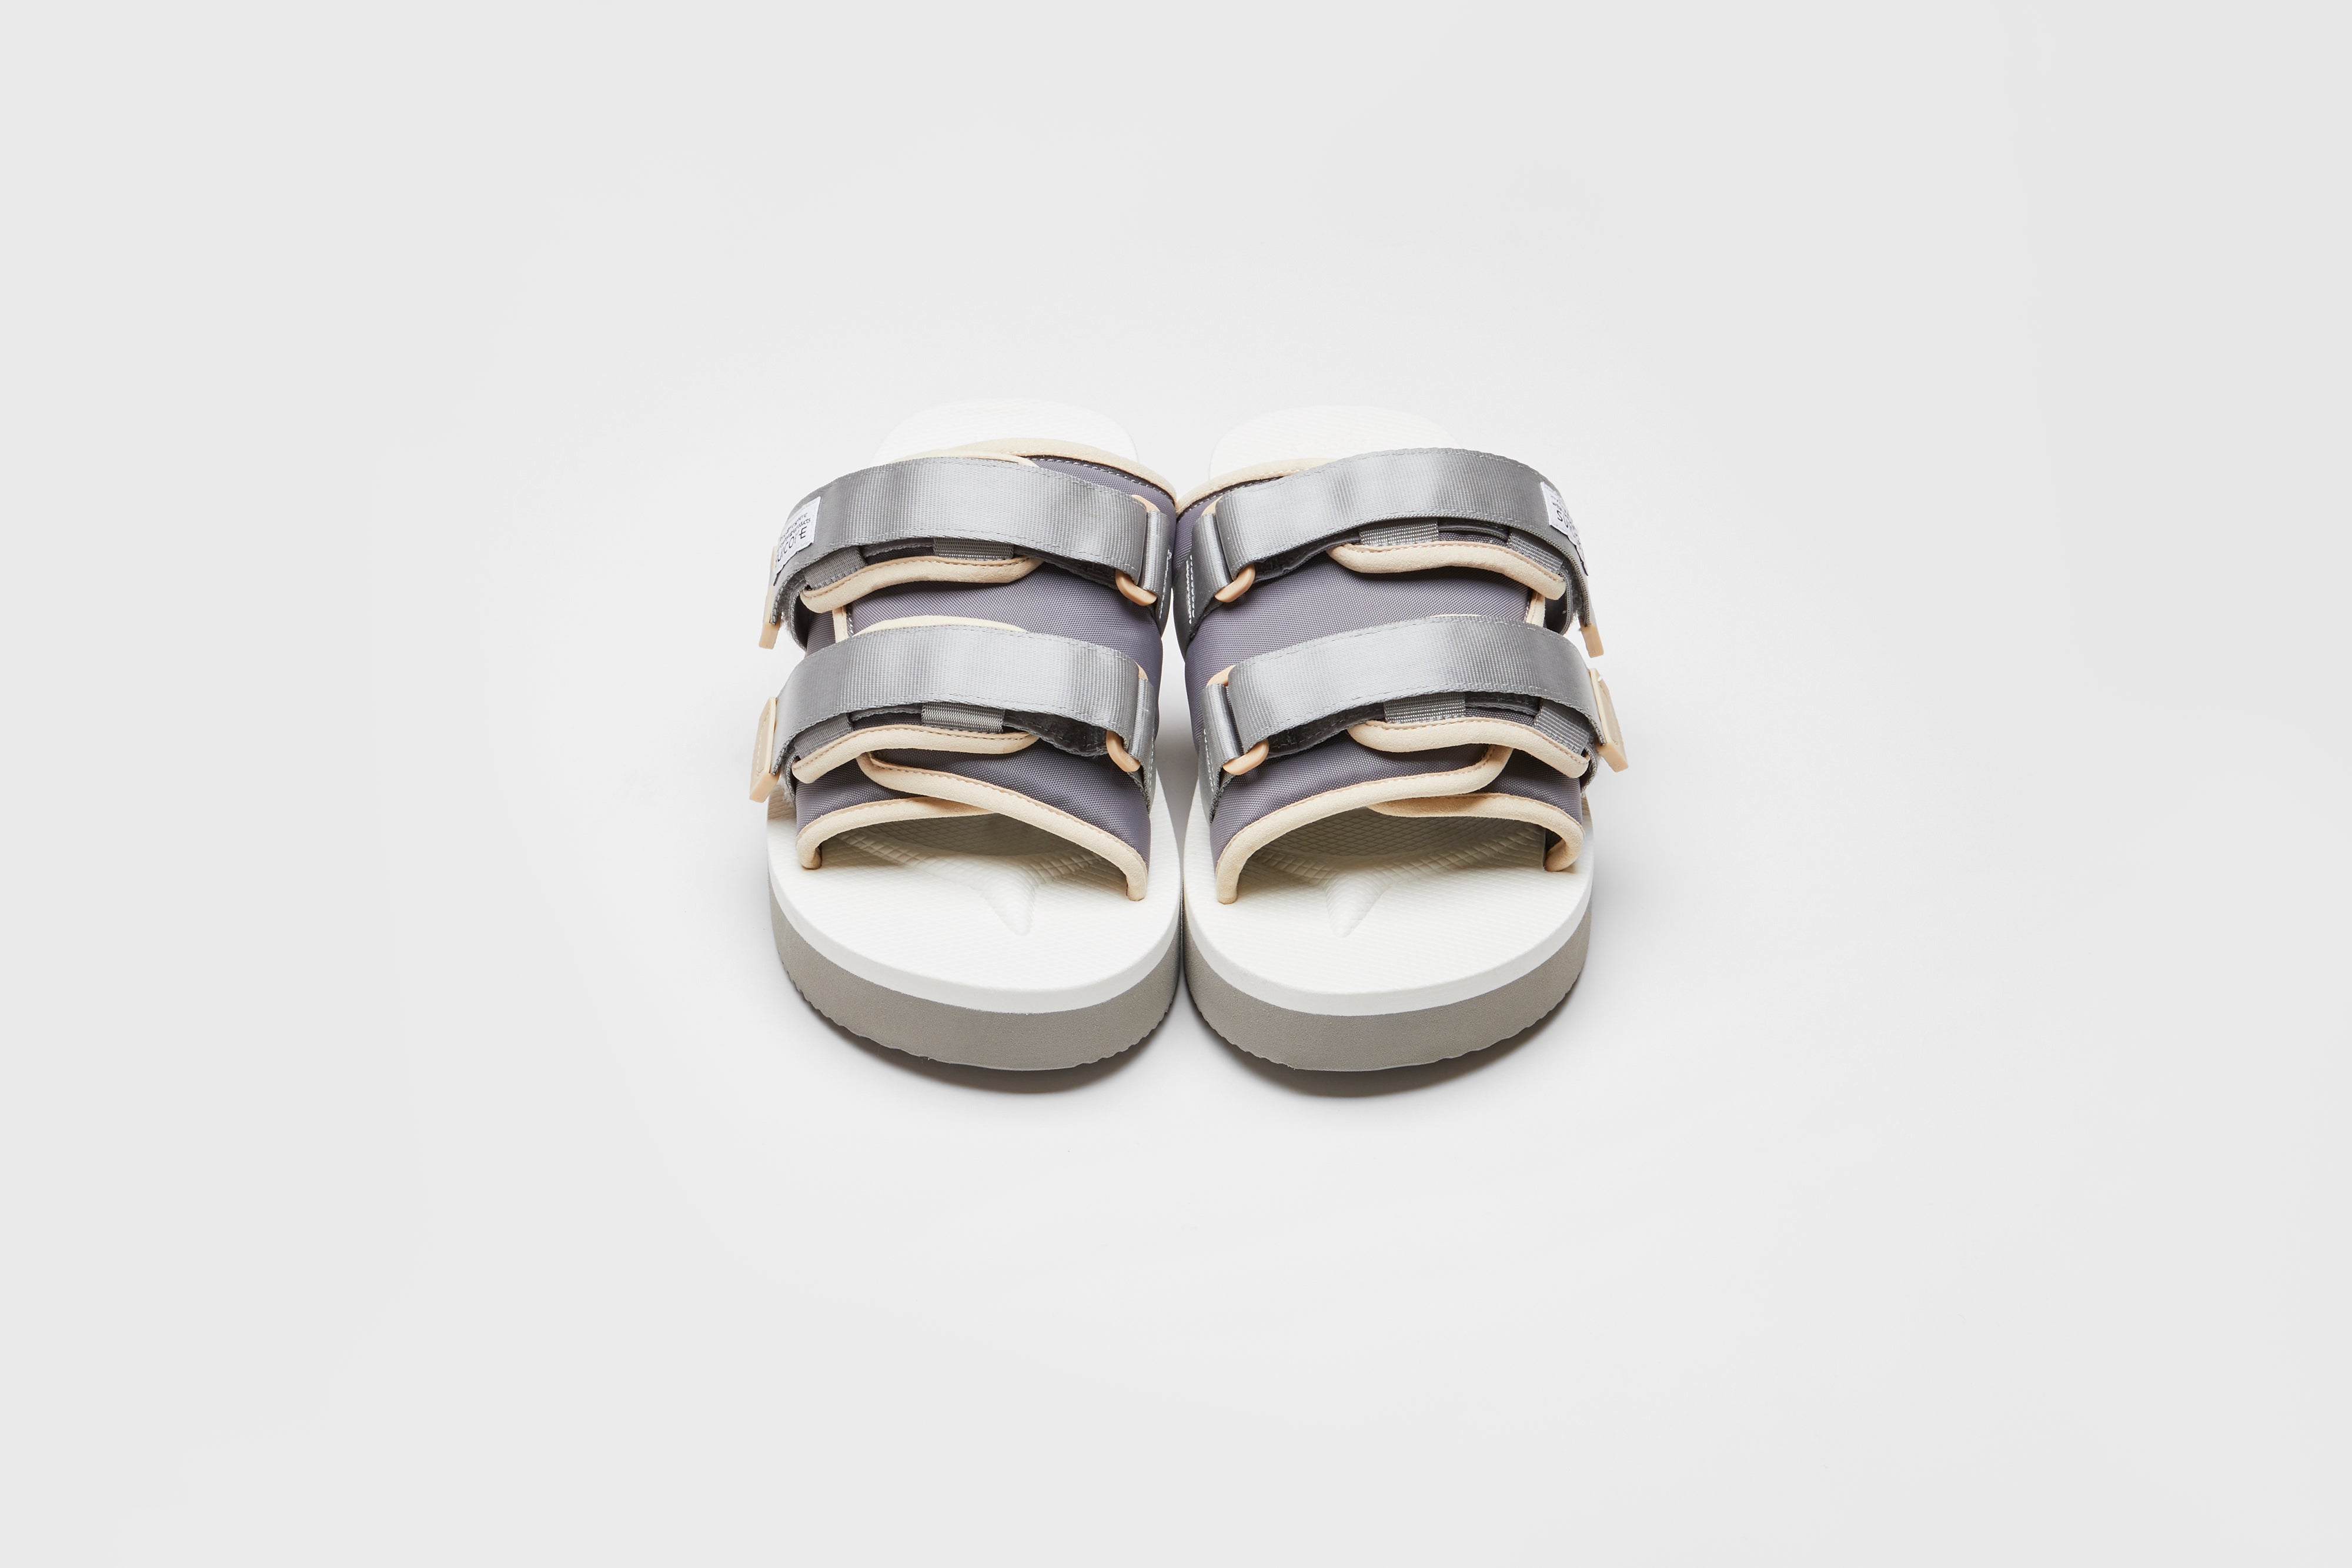 SUICOKE MOTO-PO slides with gray &amp; white nylon upper, gray &amp; white midsole and sole, strap and logo patch. From Spring/Summer 2023 collection on eightywingold Web Store, an official partner of SUICOKE. OG-056PO GRAY X WHITE